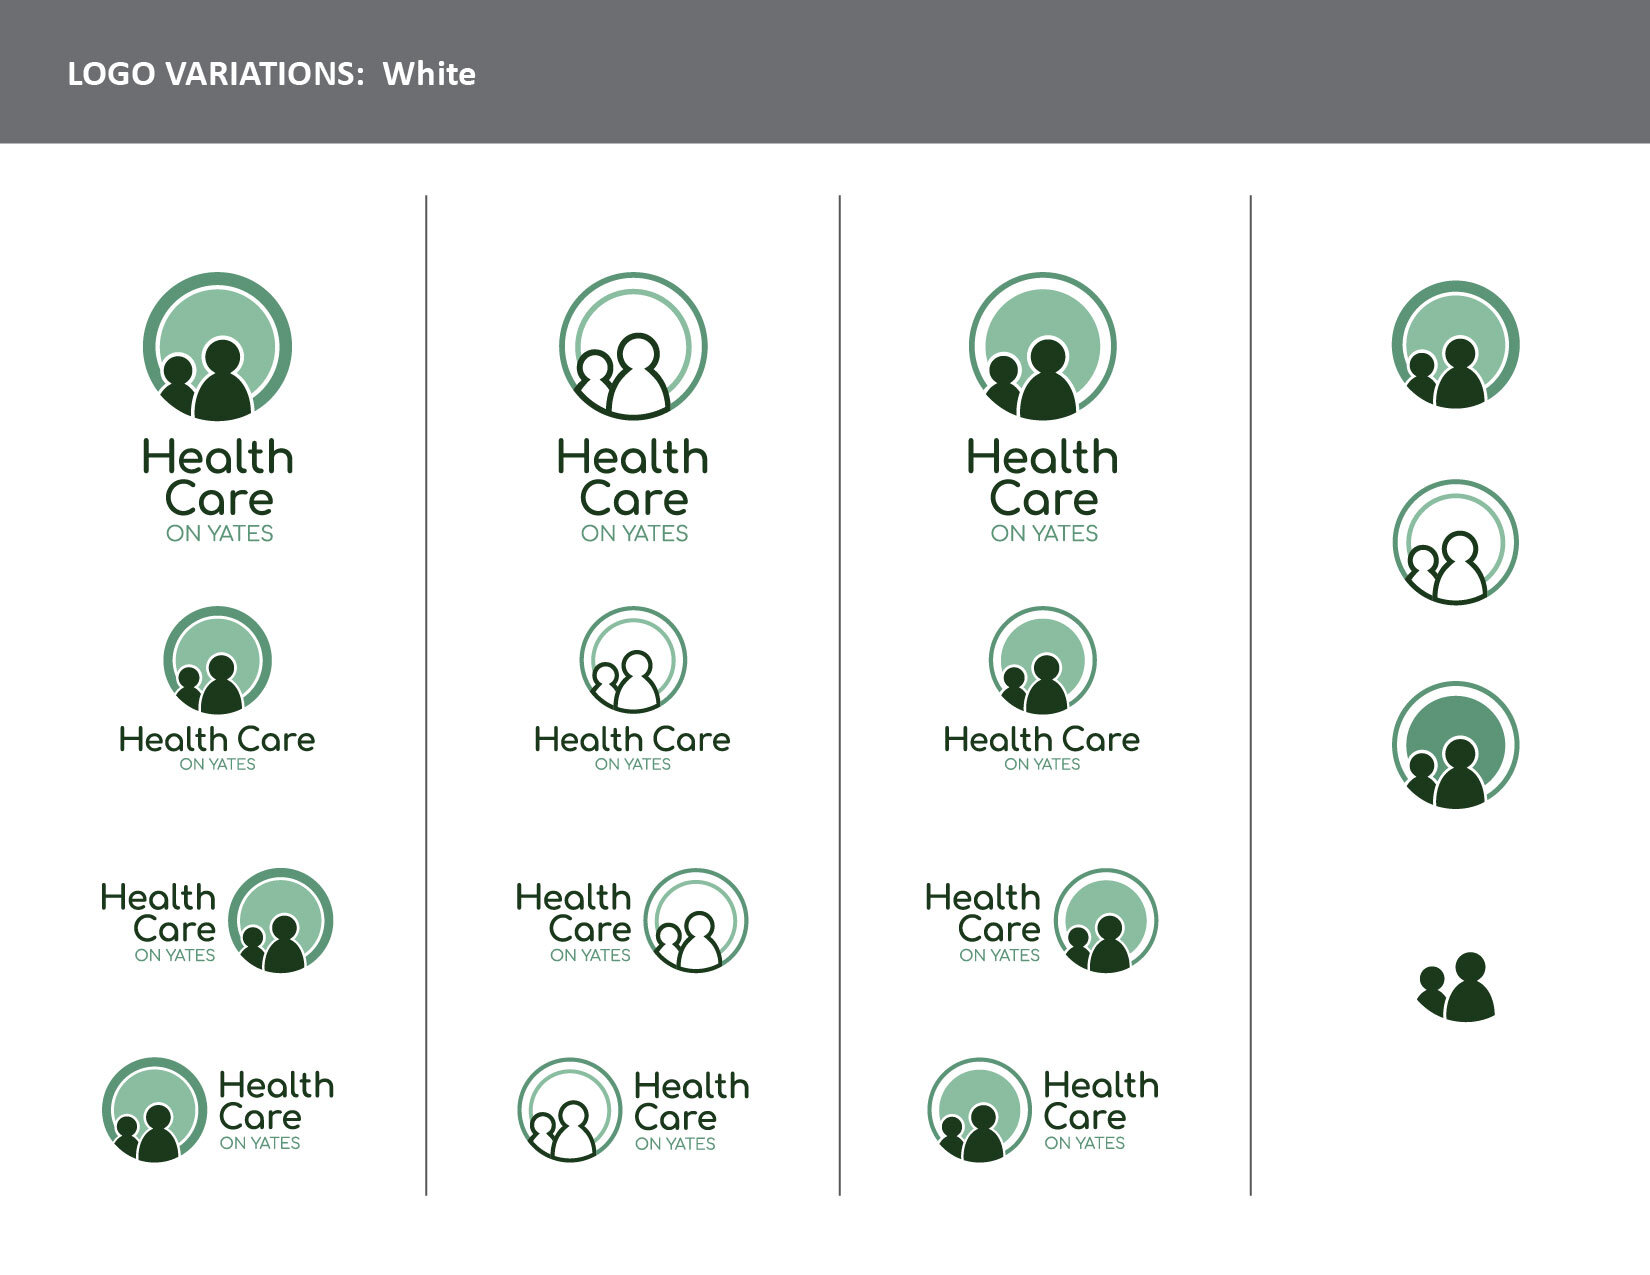 Health Care on Yates Brand guidelines-06.jpg